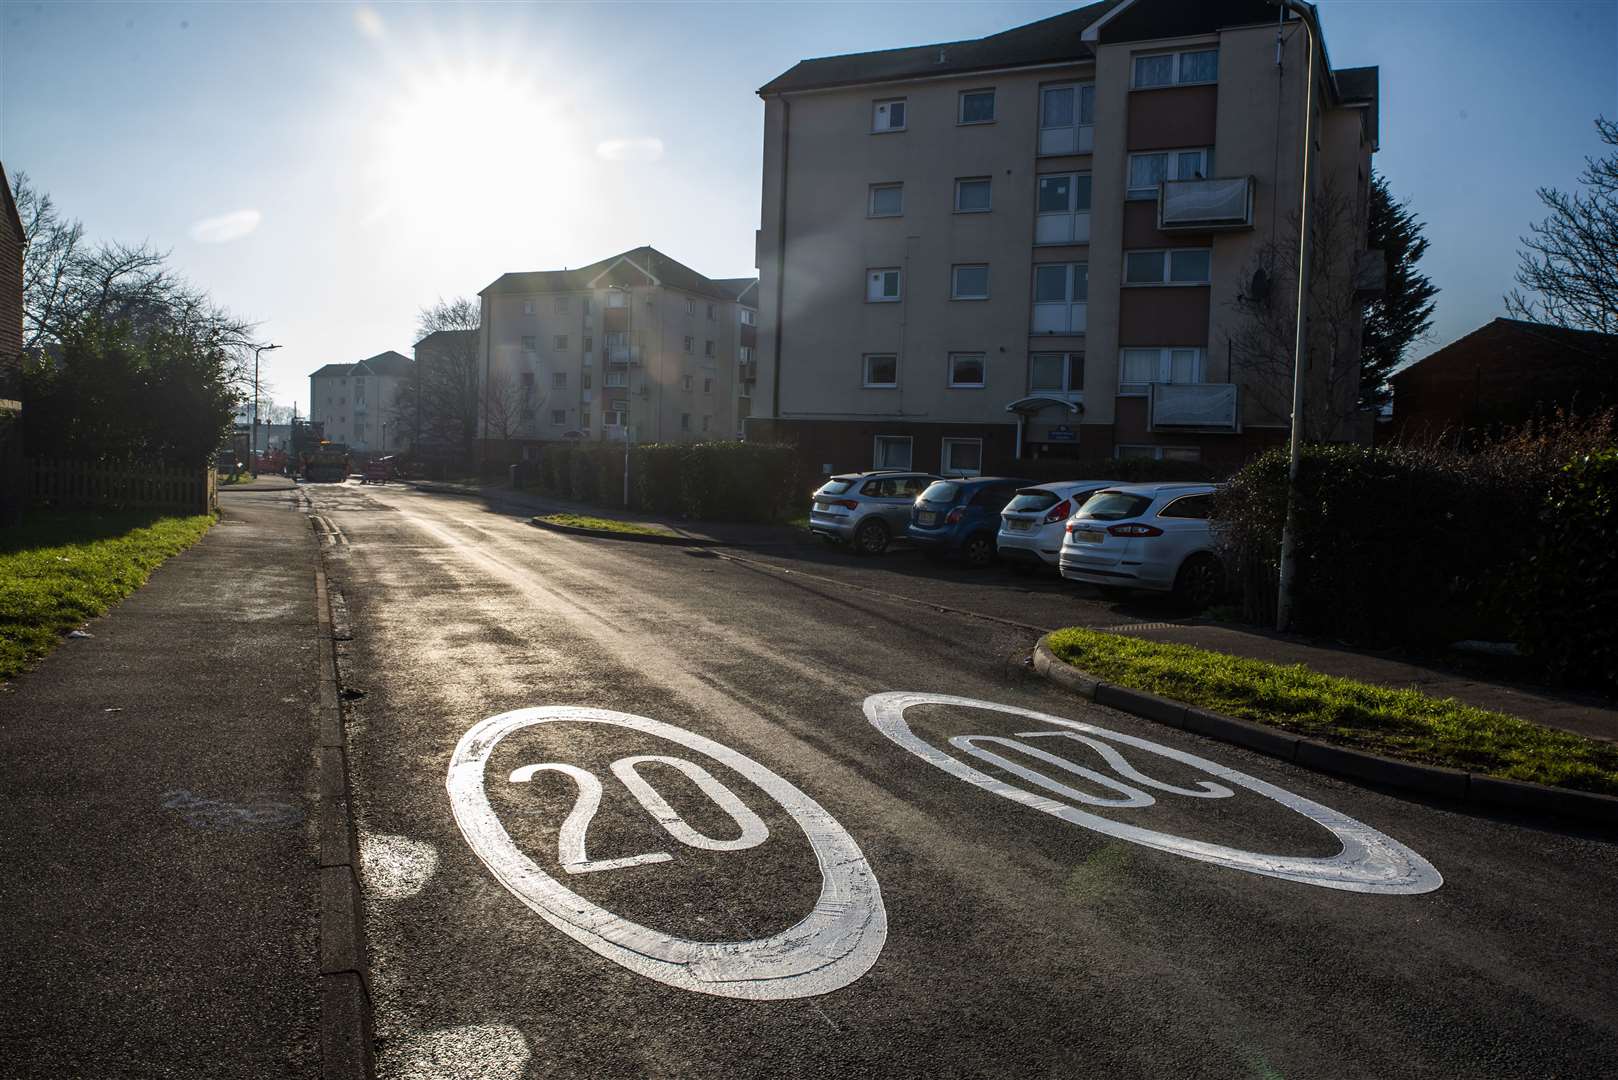 The new 20mph limit have been painted on several roads. Picture: Ellie Crook